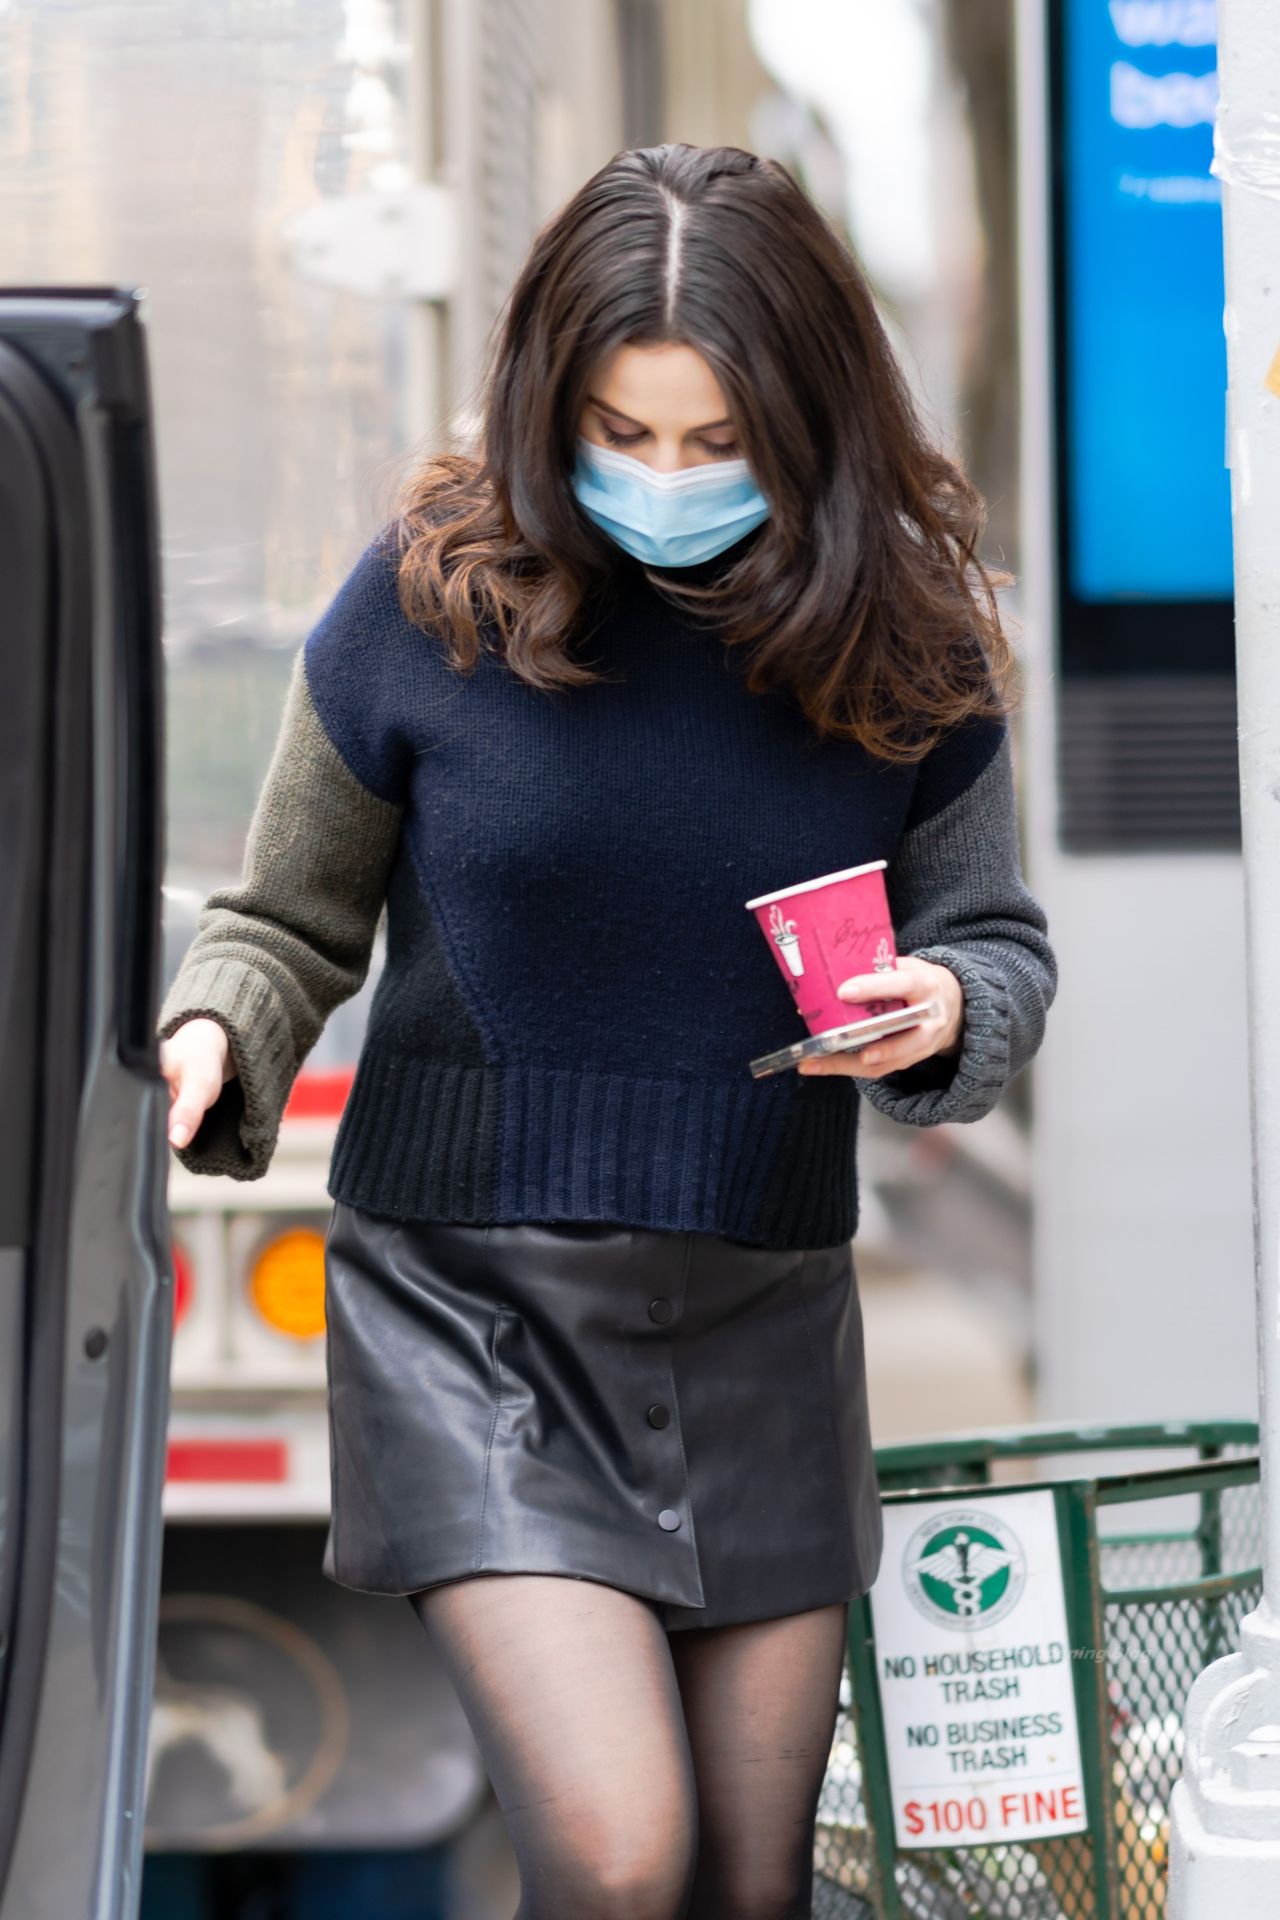 Selena Gomez is Pictured on the Set of Only Murders in the Building in NYC (16 Photos)